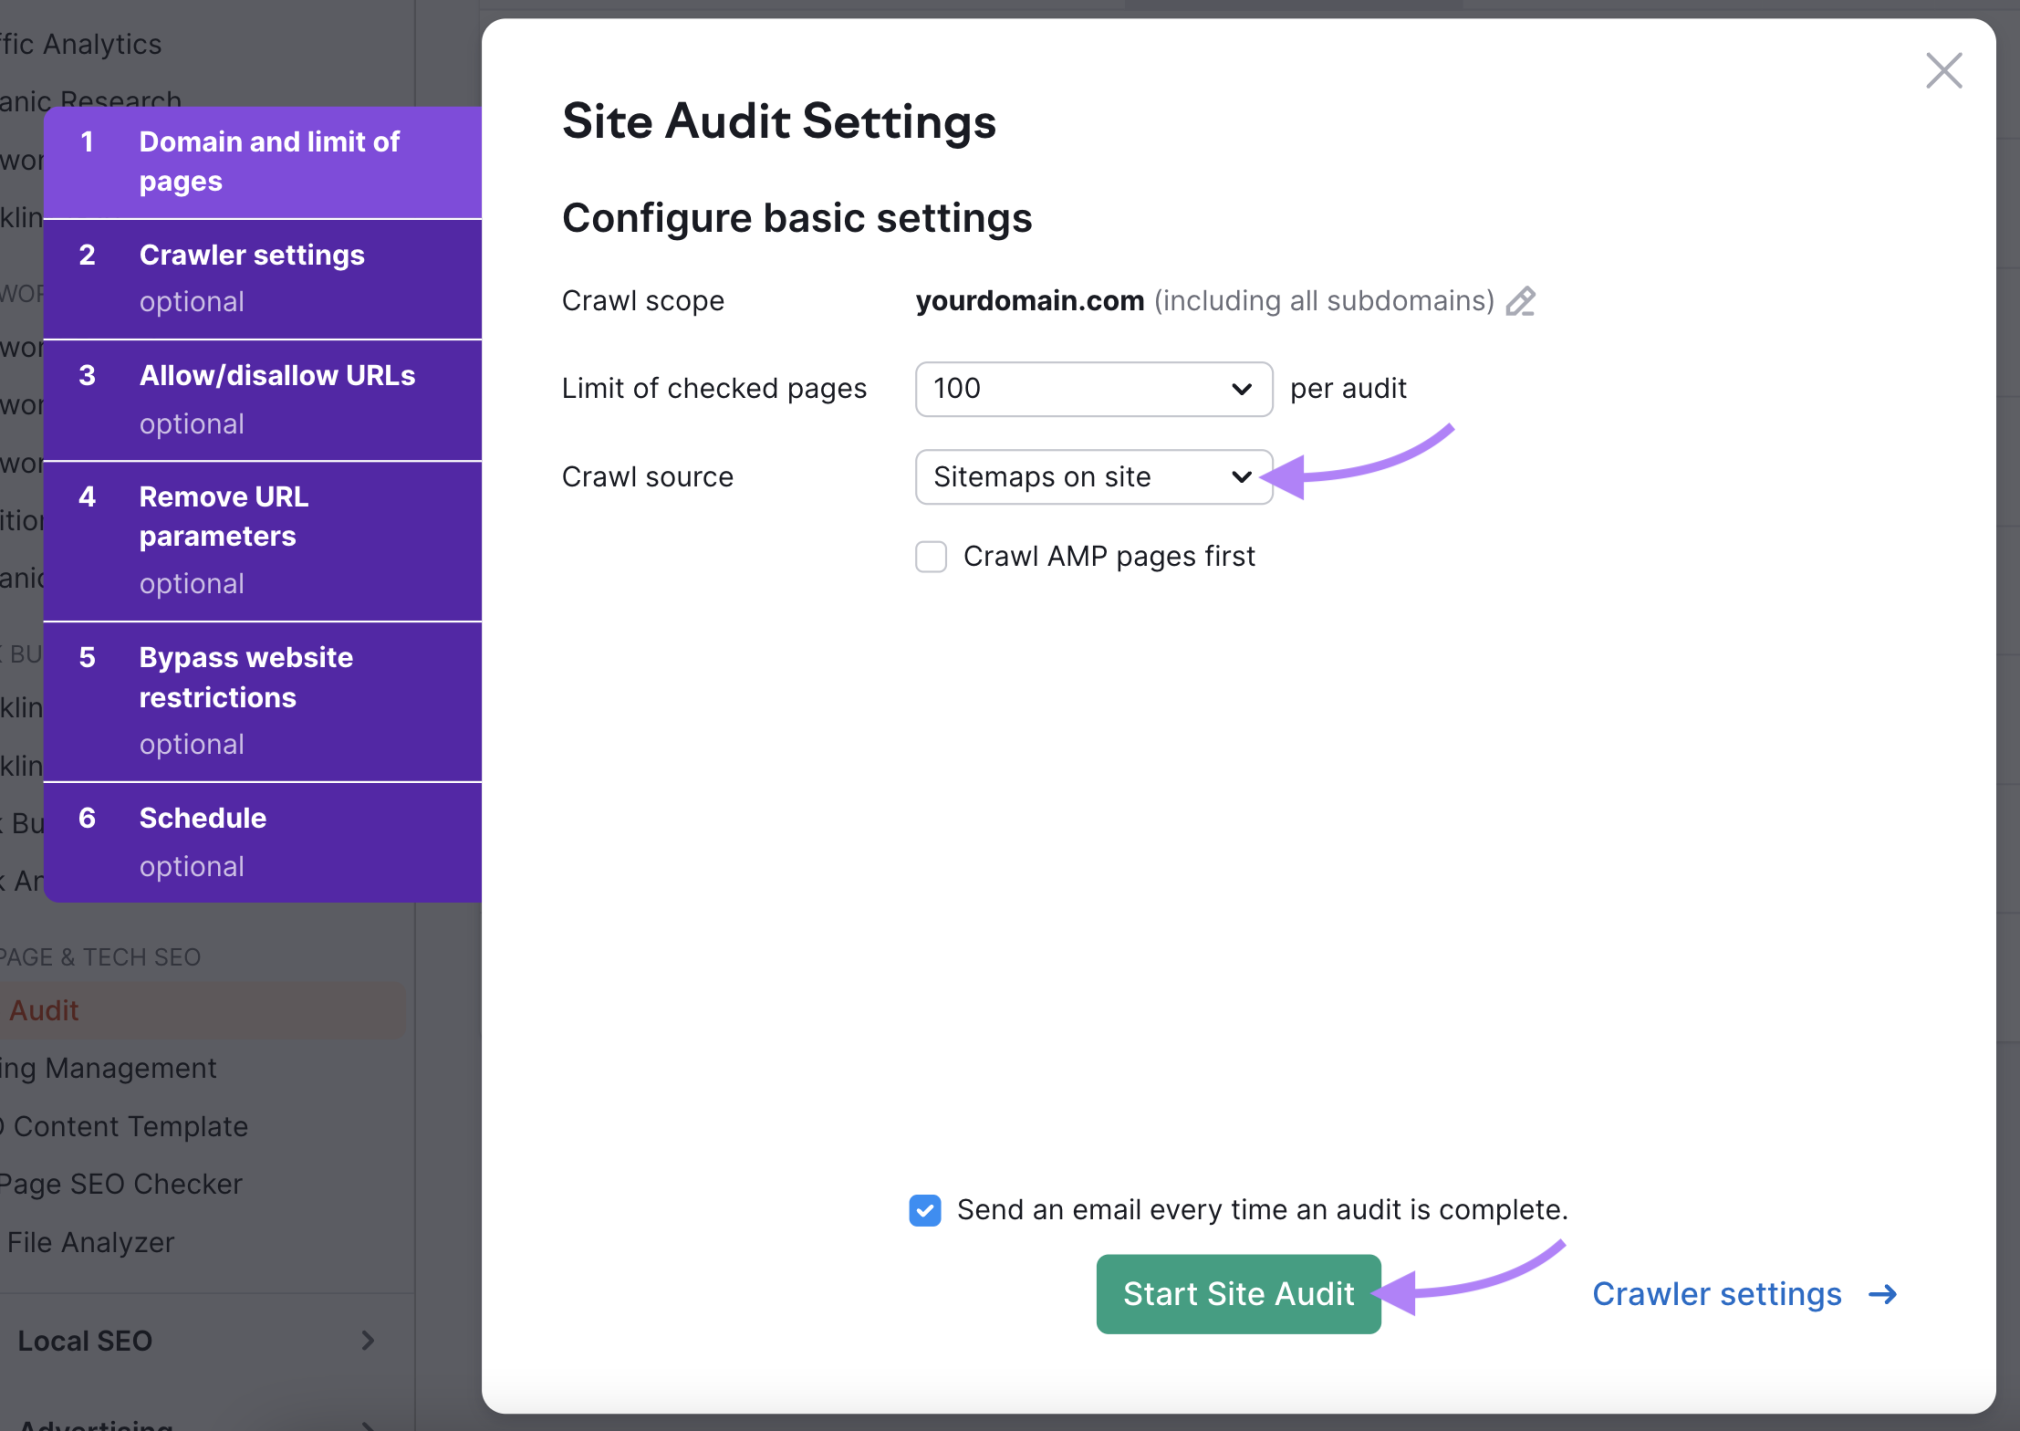 Set the crawl source and start the site audit